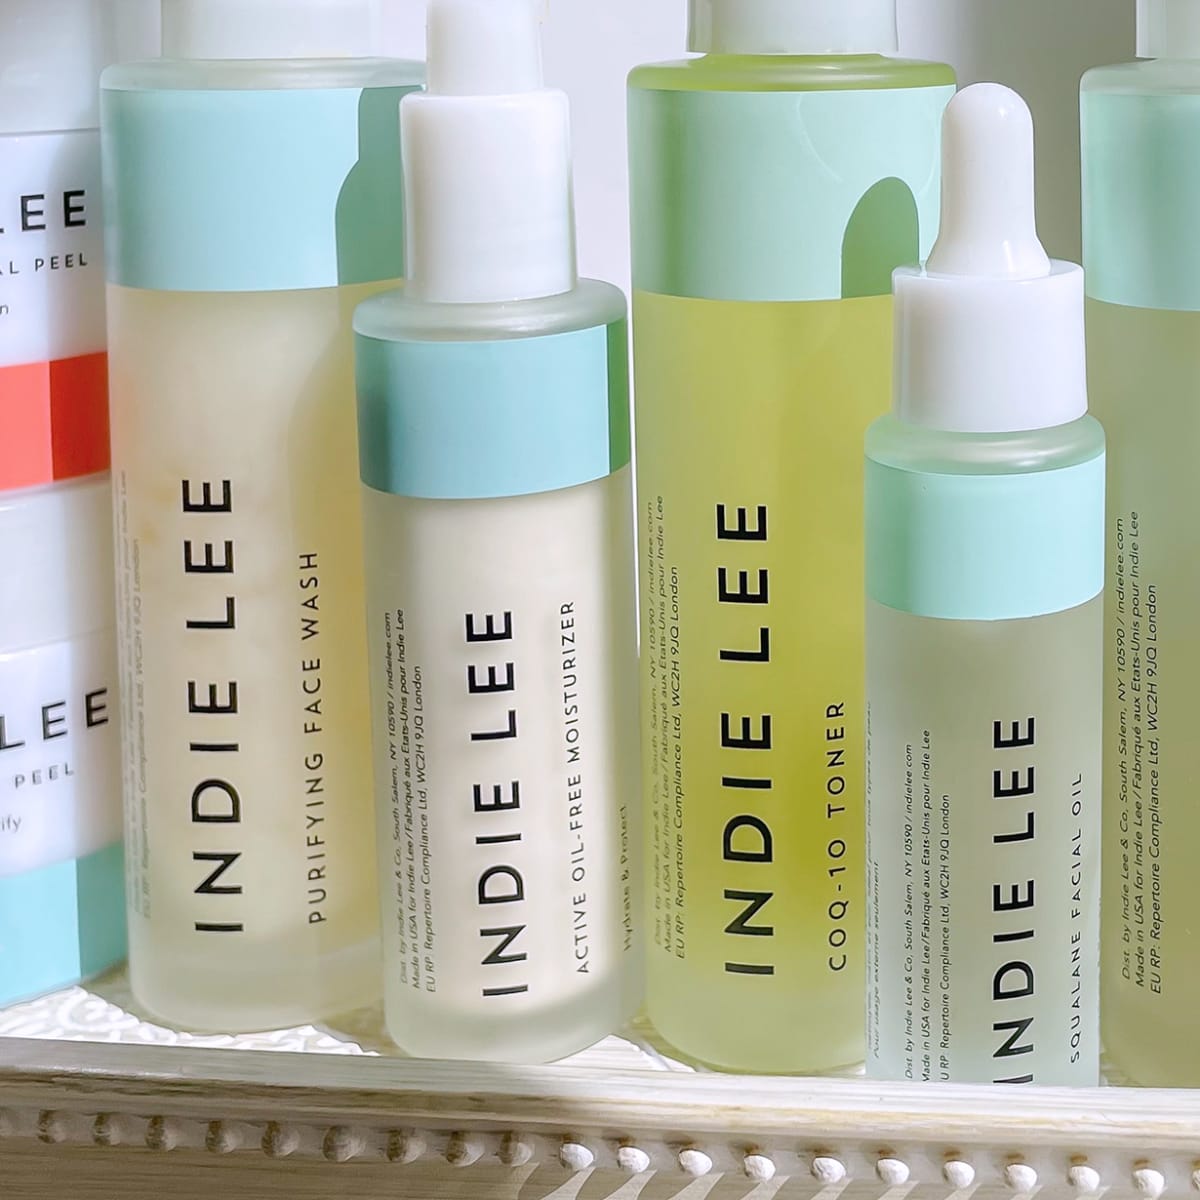 Indie Lee Reviews: Best and Worst Skincare Products - The Skincare